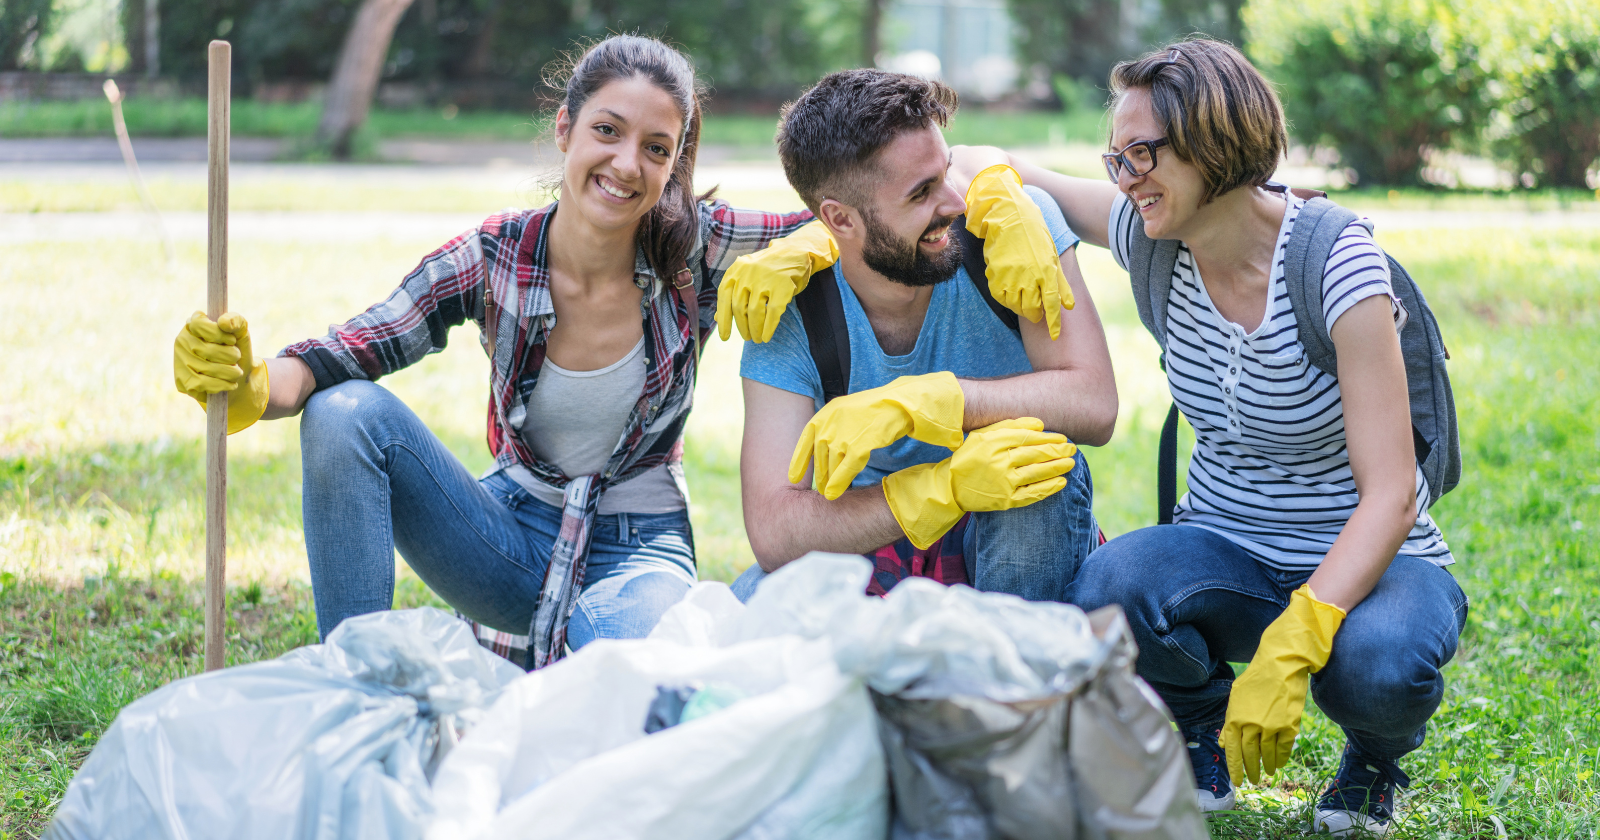 Photo shows two smiling young women and a man taking care of the environment.